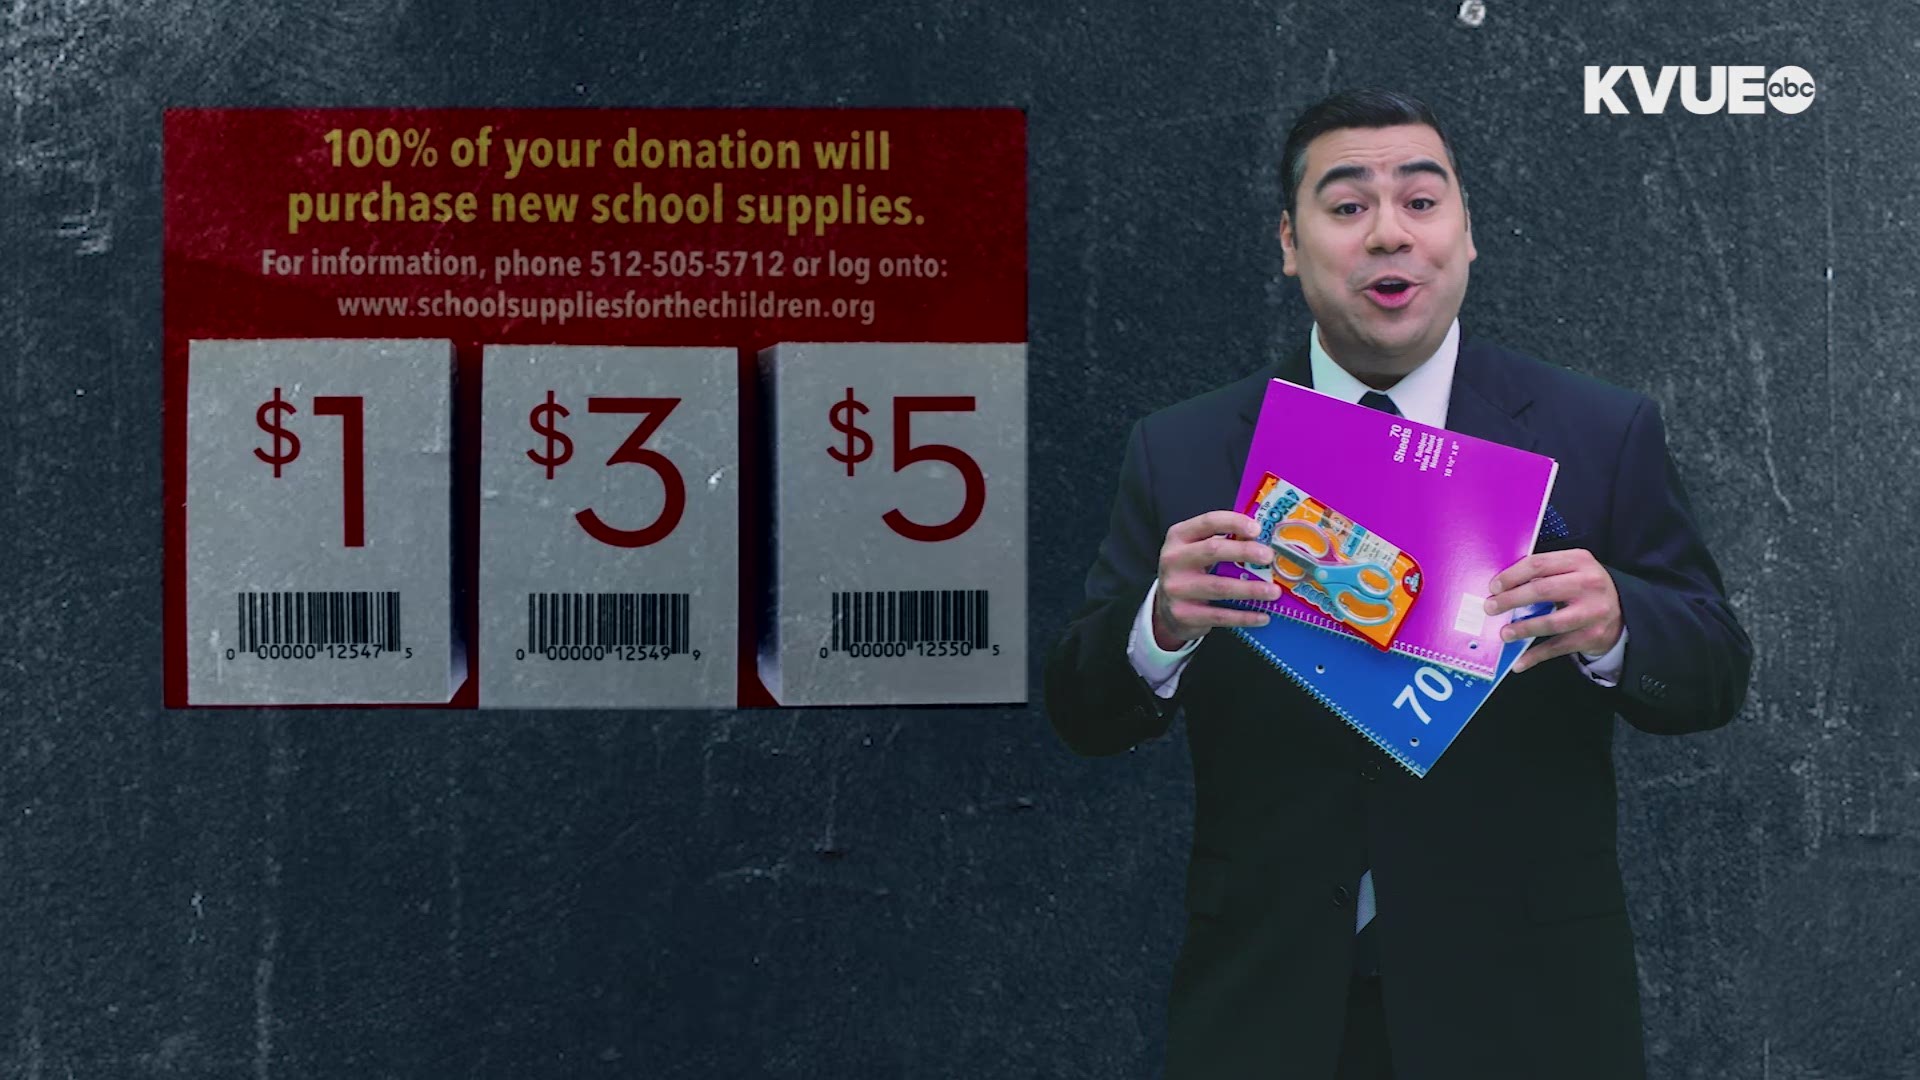 Grab your school supplies because KVUE's For the Children Drive is back again in 2019!